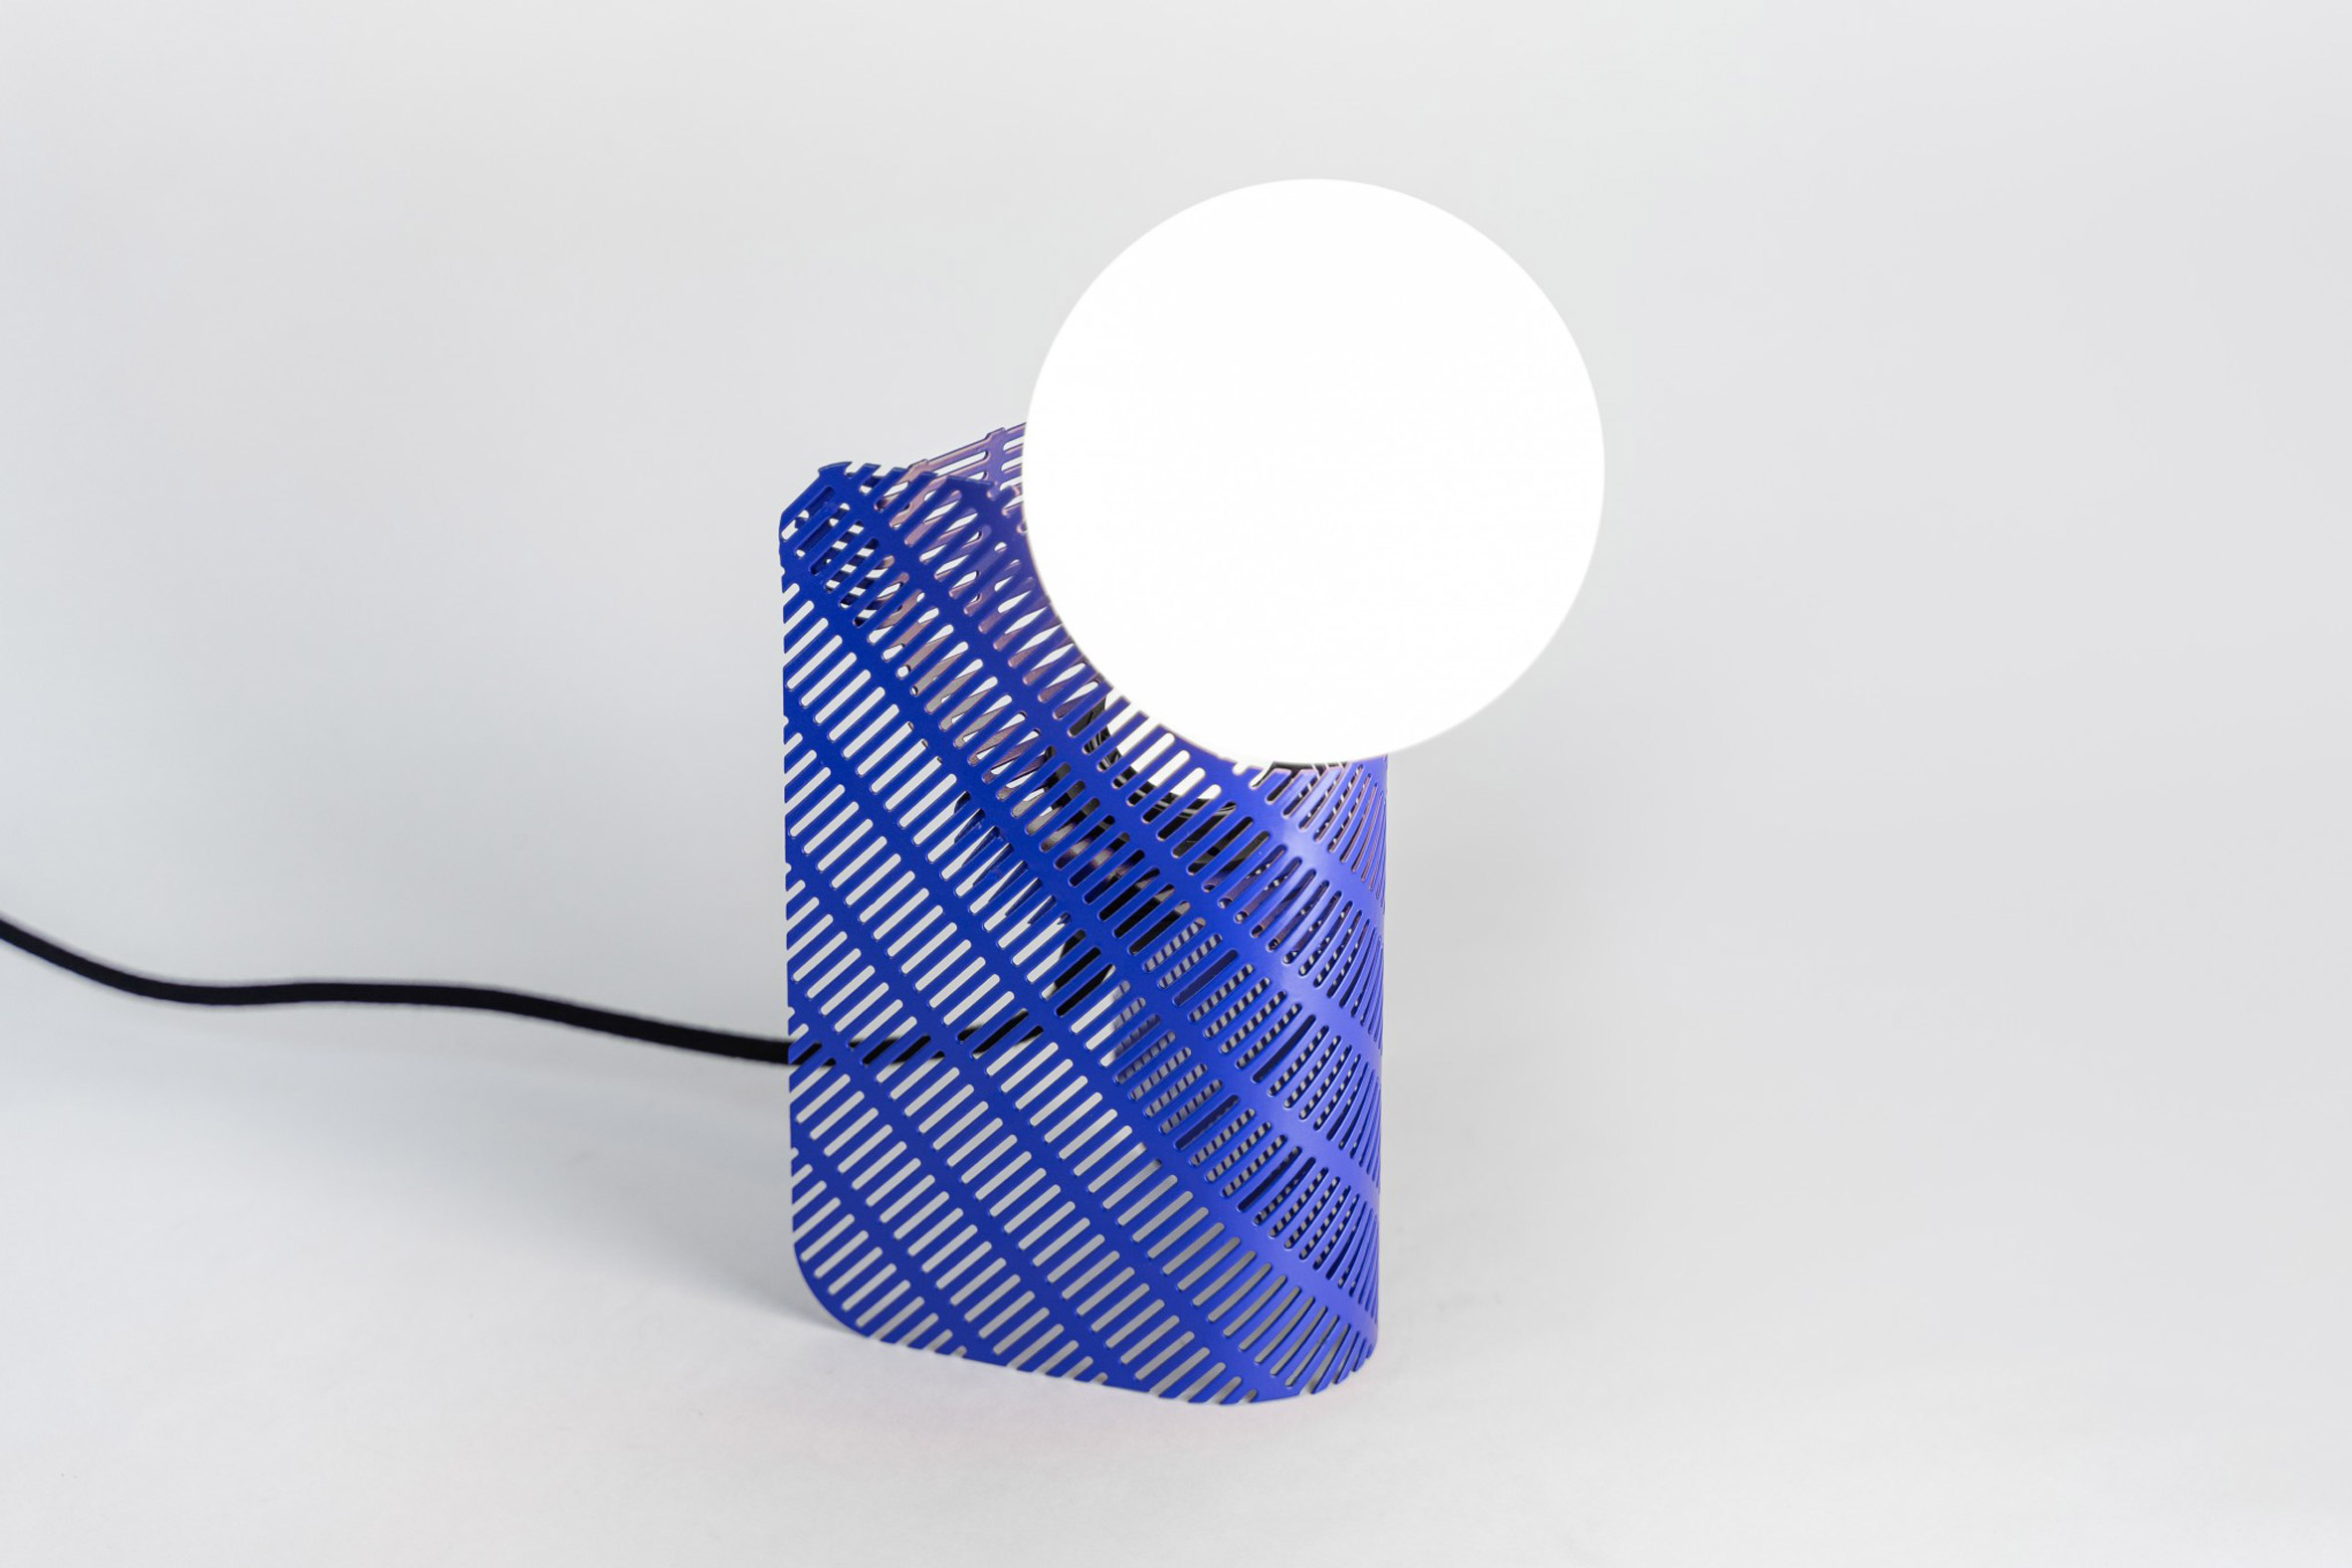 Blue Slot table lamp by GoodWaste